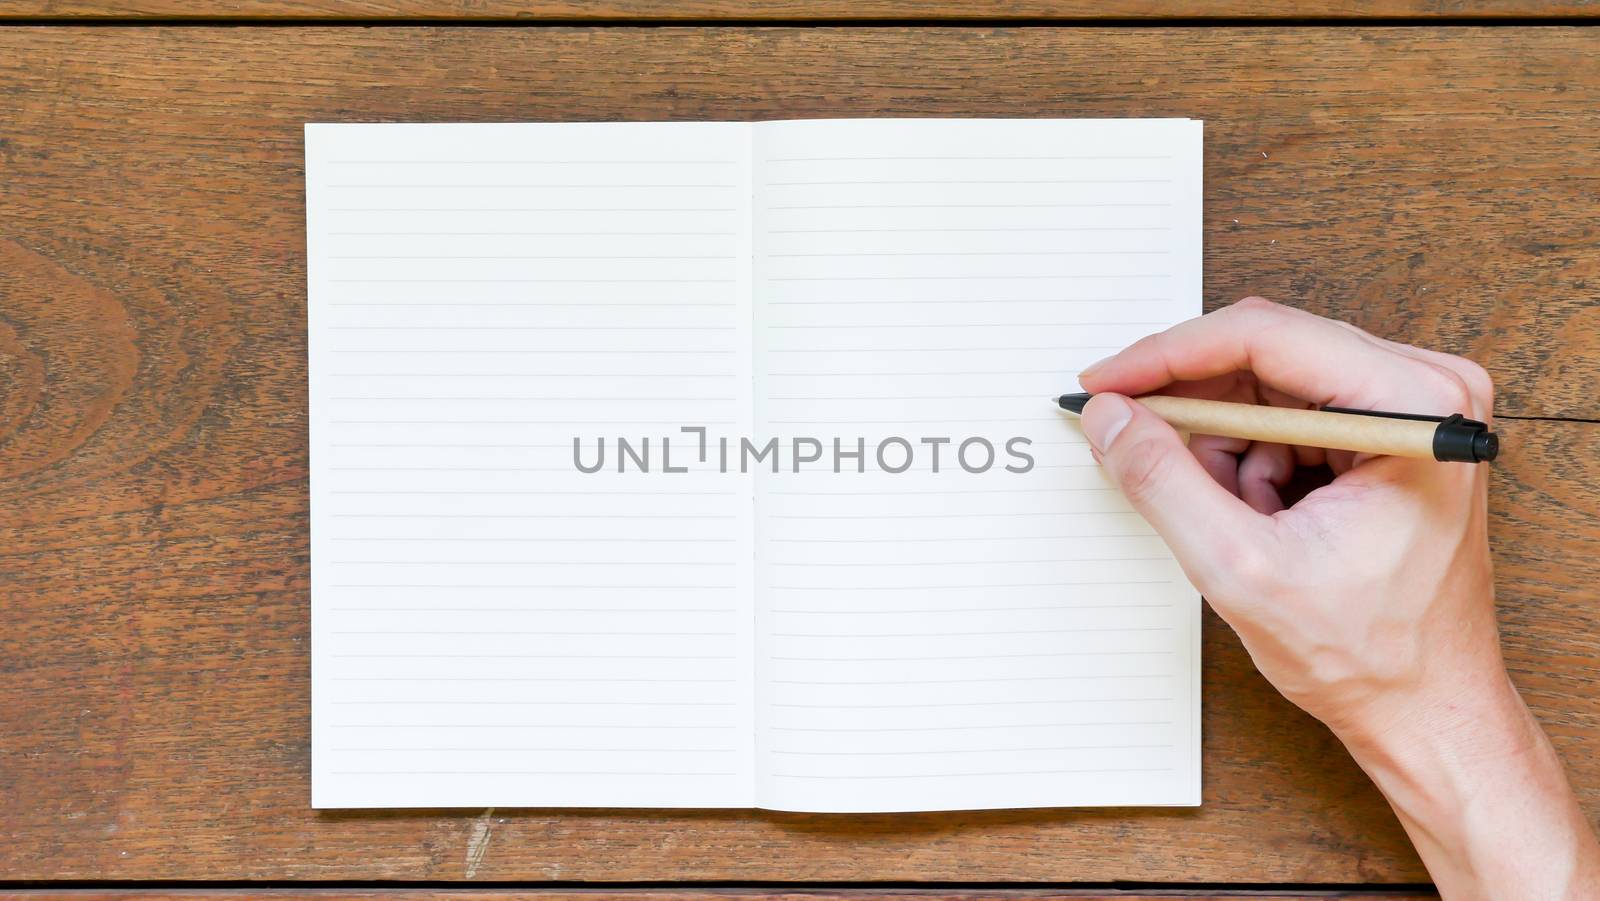 Man hands with pen writing on empty notepad over wooden table.